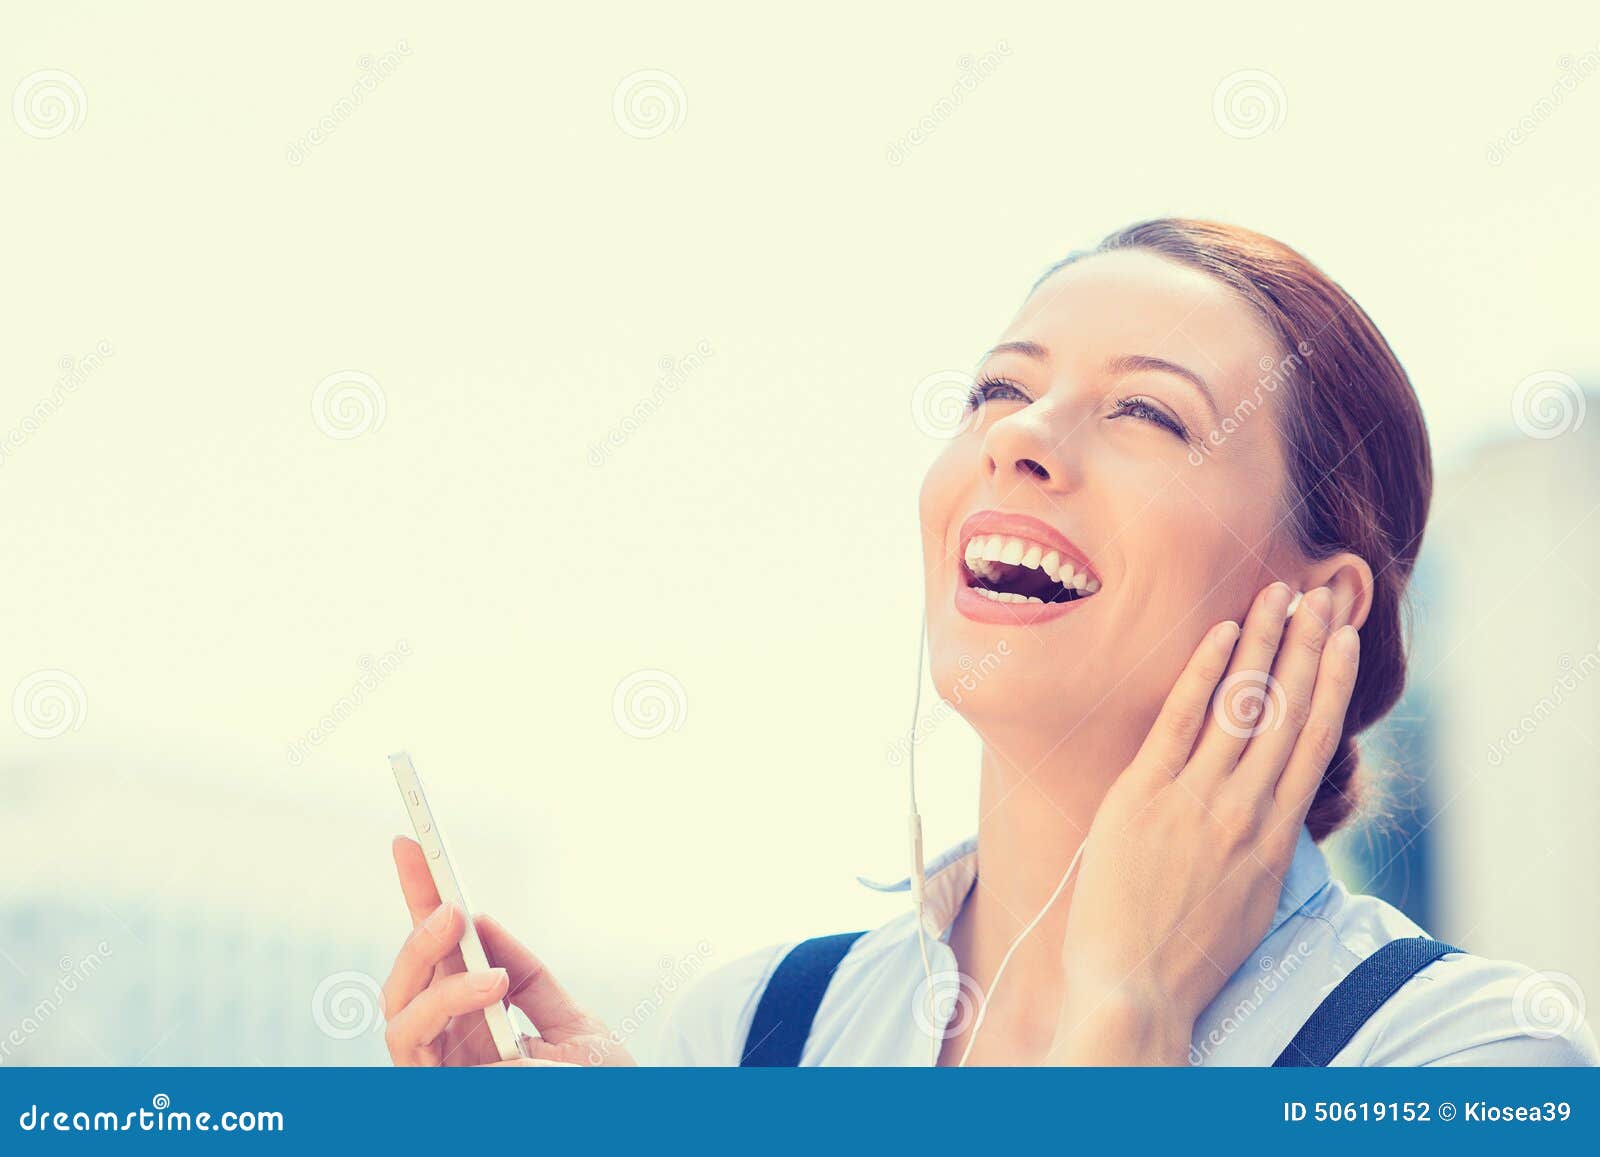 Woman walking on street listening music on mobile smart phone - woman-walking-street-listening-music-mobile-smart-phone-closeup-portrait-attractive-smiling-business-outdoor-laughing-50619152